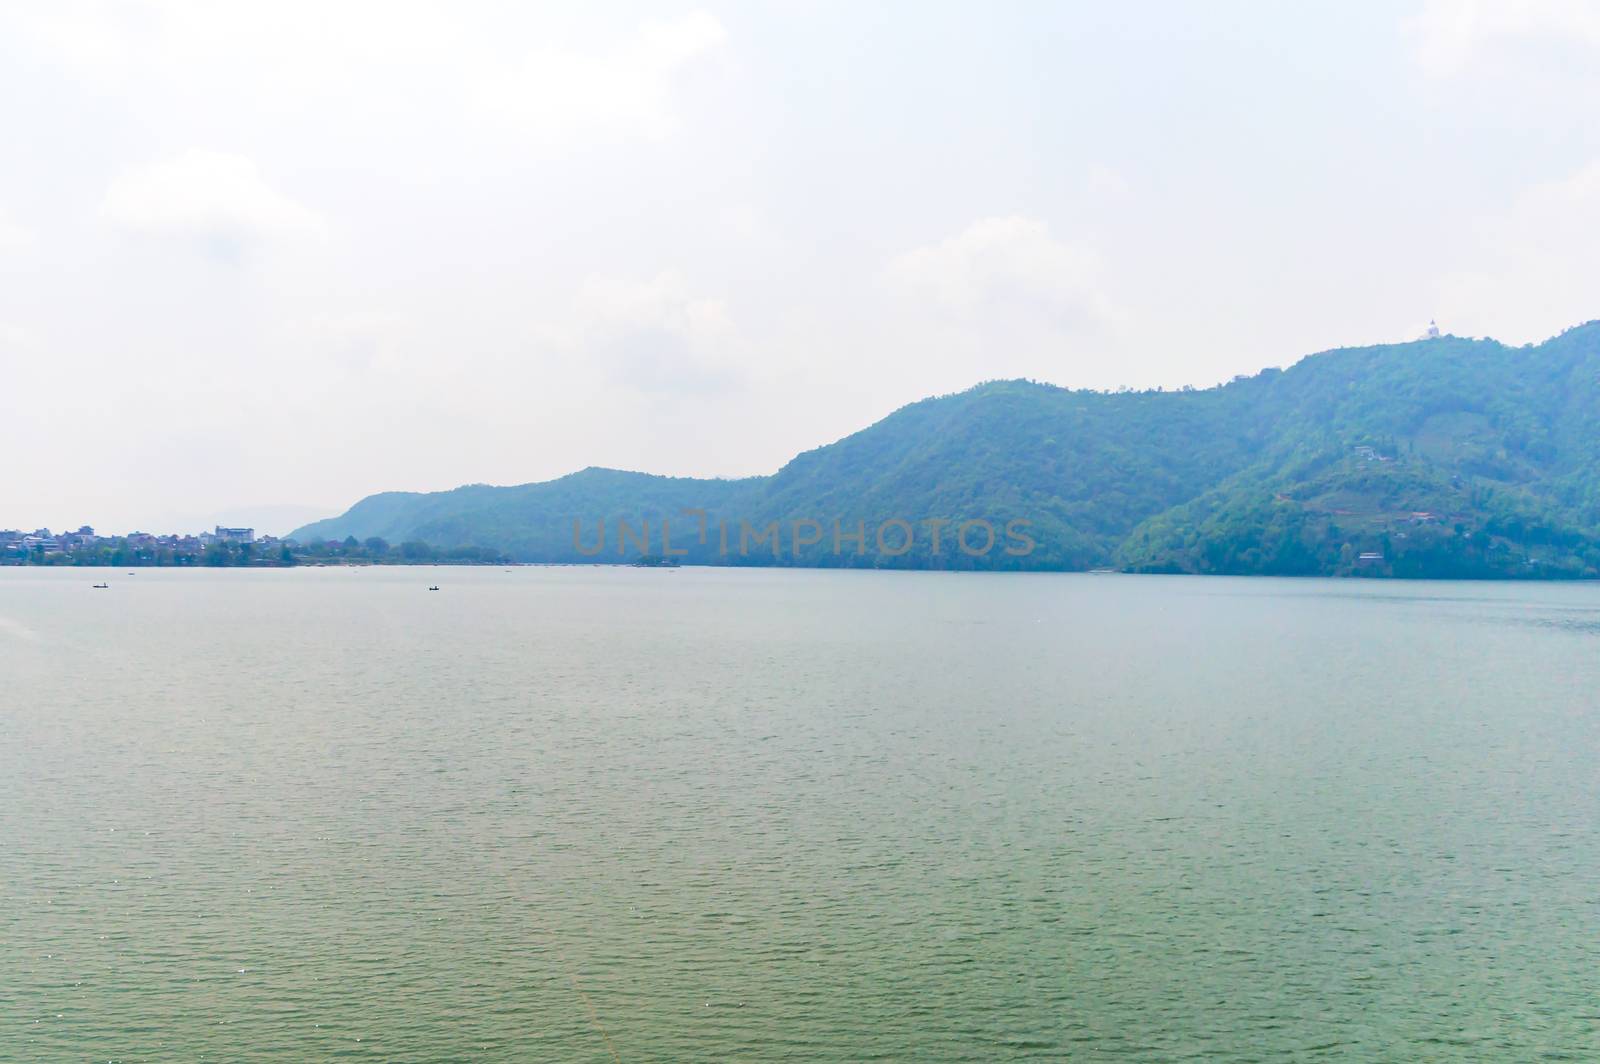 Photograph of sky, lake, mountain and reflexion Near Pokhara Lake at Kathmandu Nepal. Snap in portrait, landscape, wide screen. Vintage film look. Nature Freedom, Travel, Energy, Environment Concept.